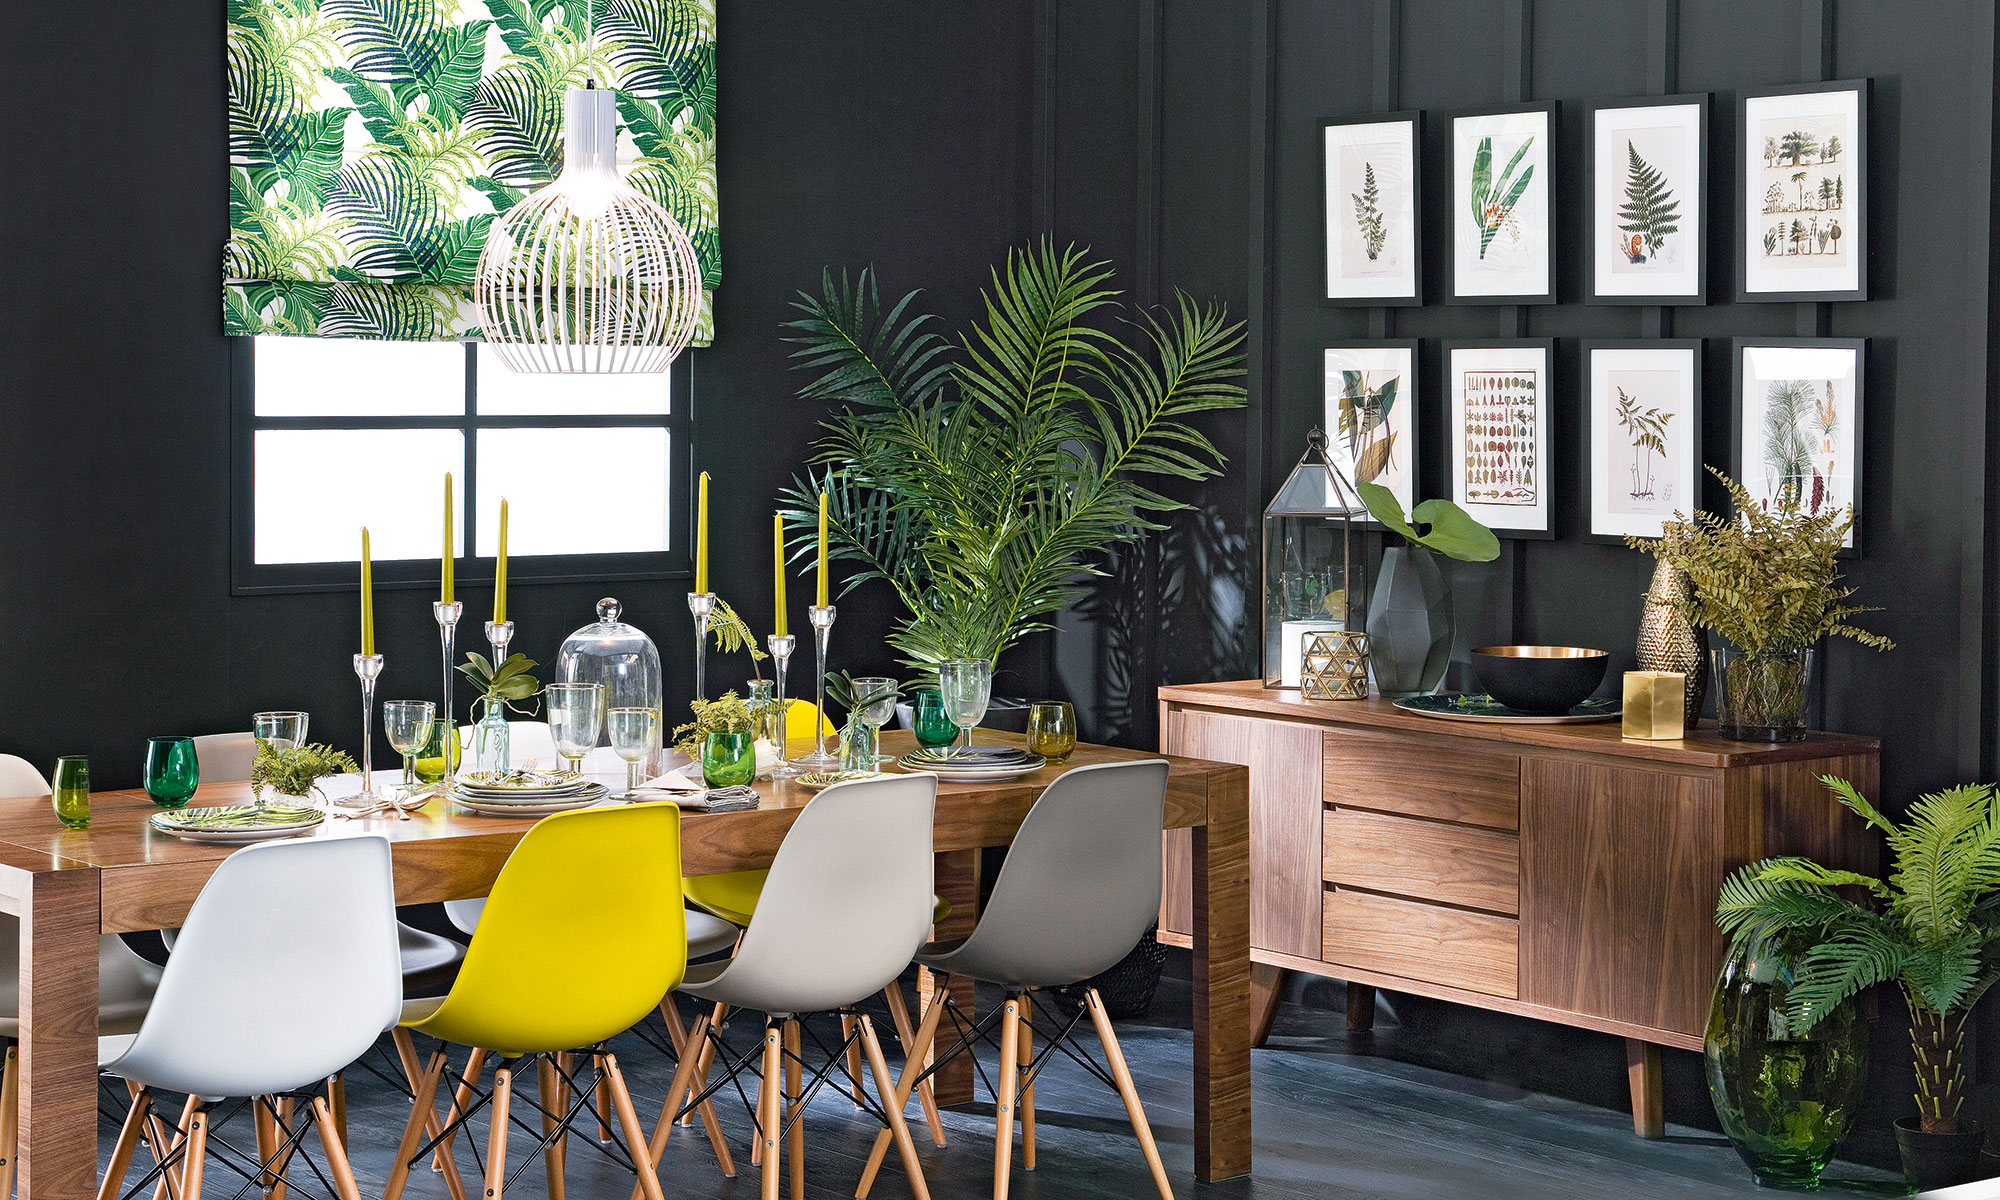 Budget dining room ideas – serve up a fresh look on a shoestring